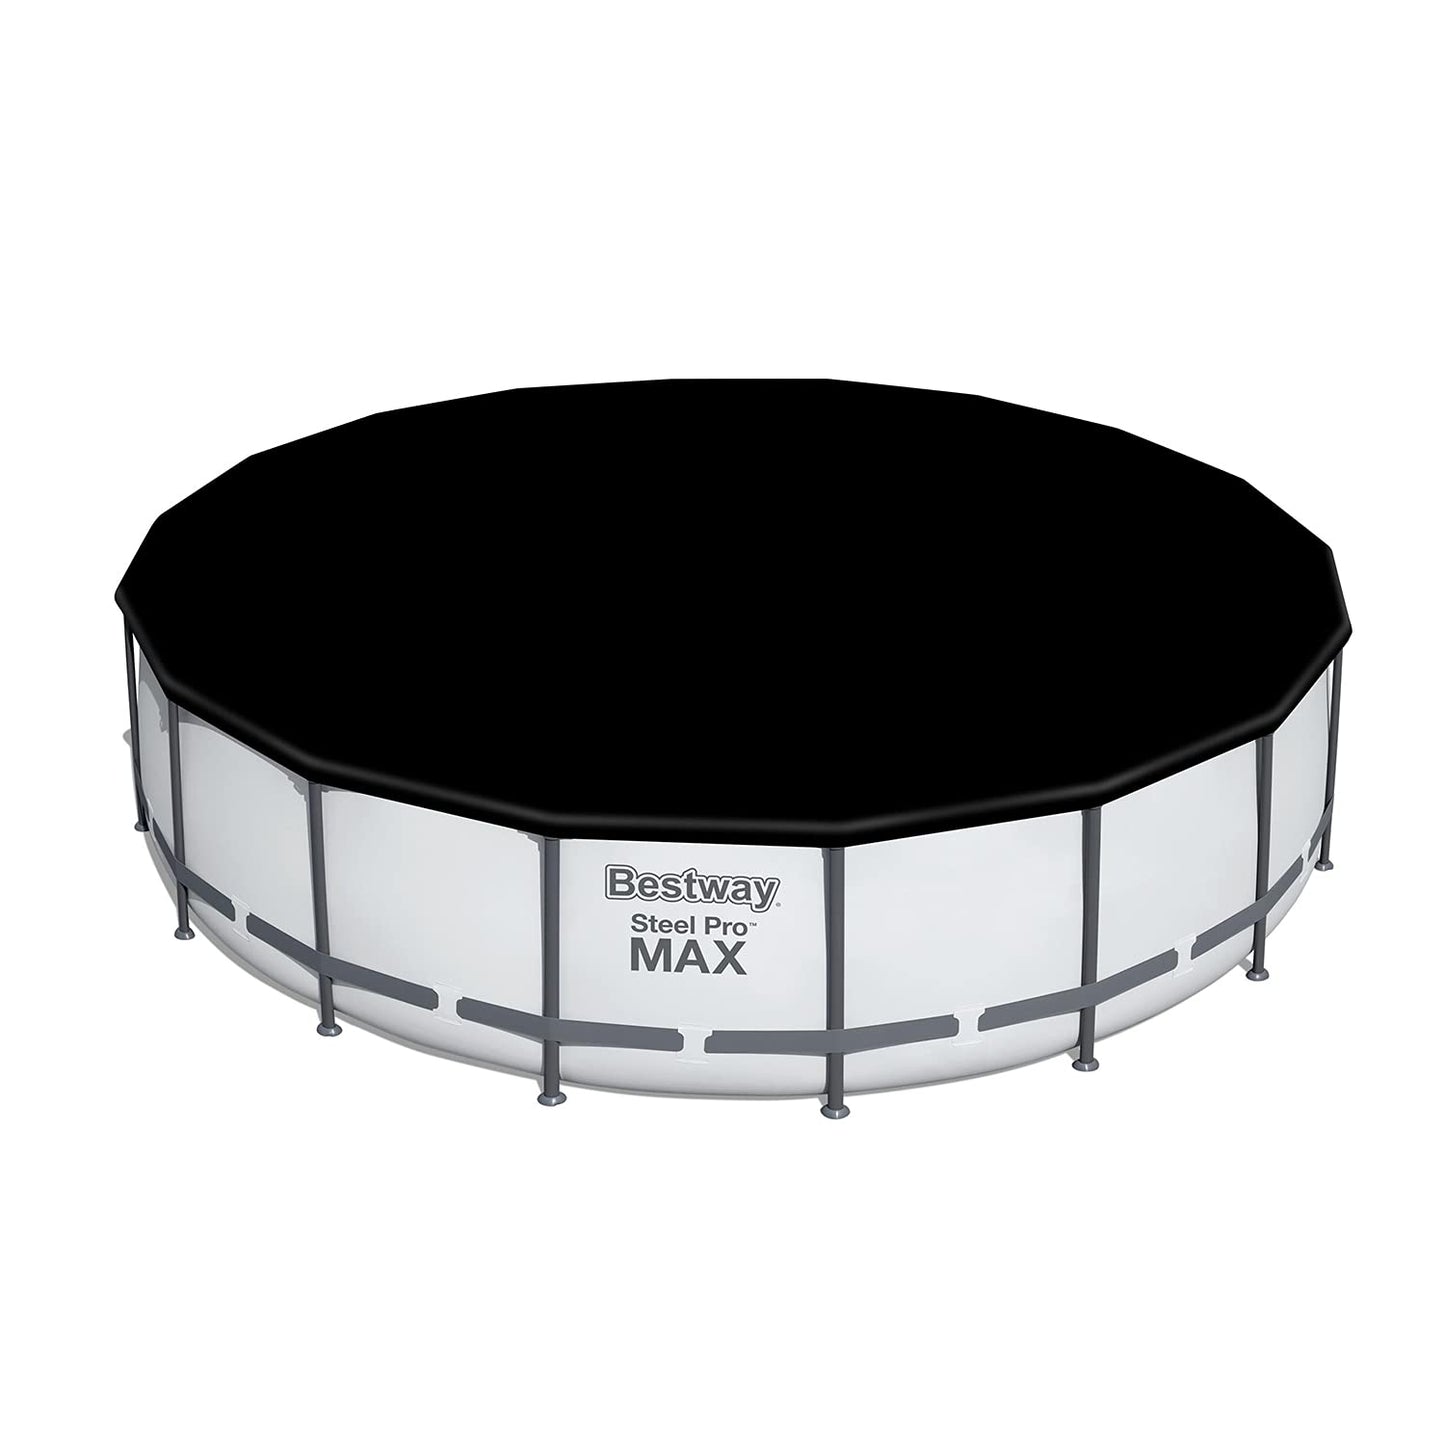 Bestway Steel Pro MAX 18 Foot x 48 Inch Round Metal Frame Above Ground Outdoor Swimming Pool Set with 1,000 Filter Pump, Ladder, and Cover 18' x 48"